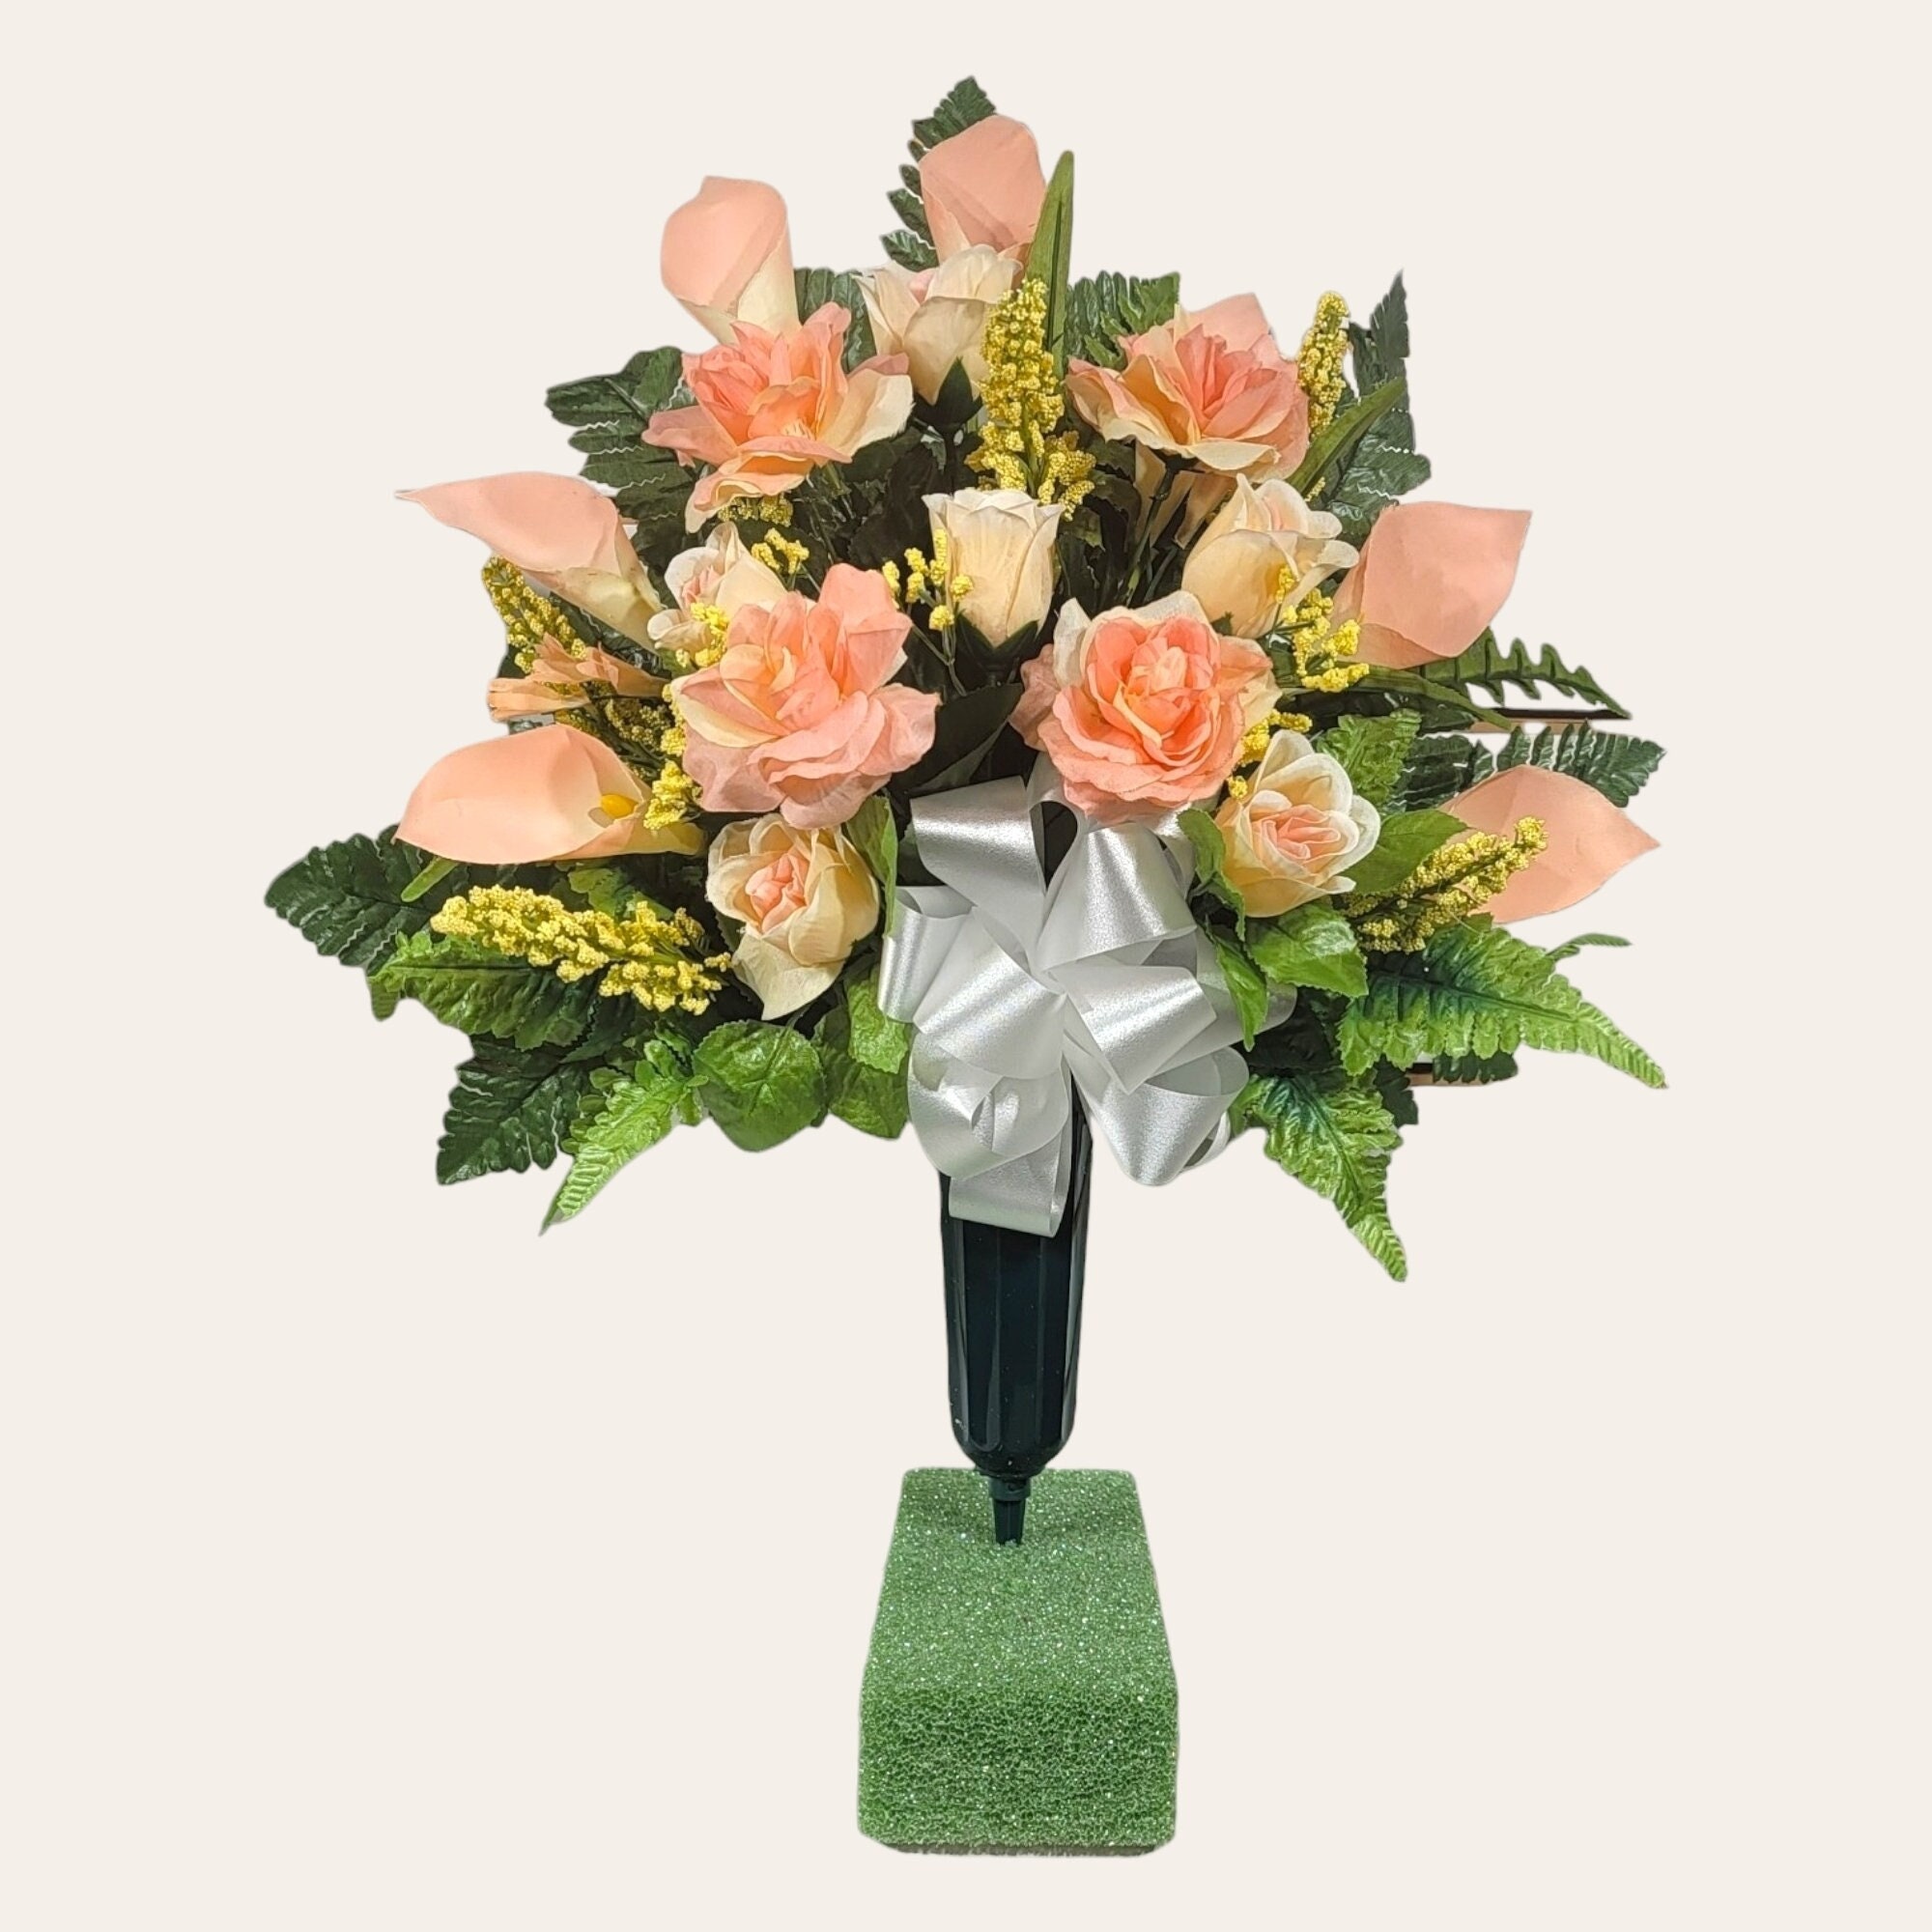 Flower Arrangements And Decor, Martin's Floral And Home Decor